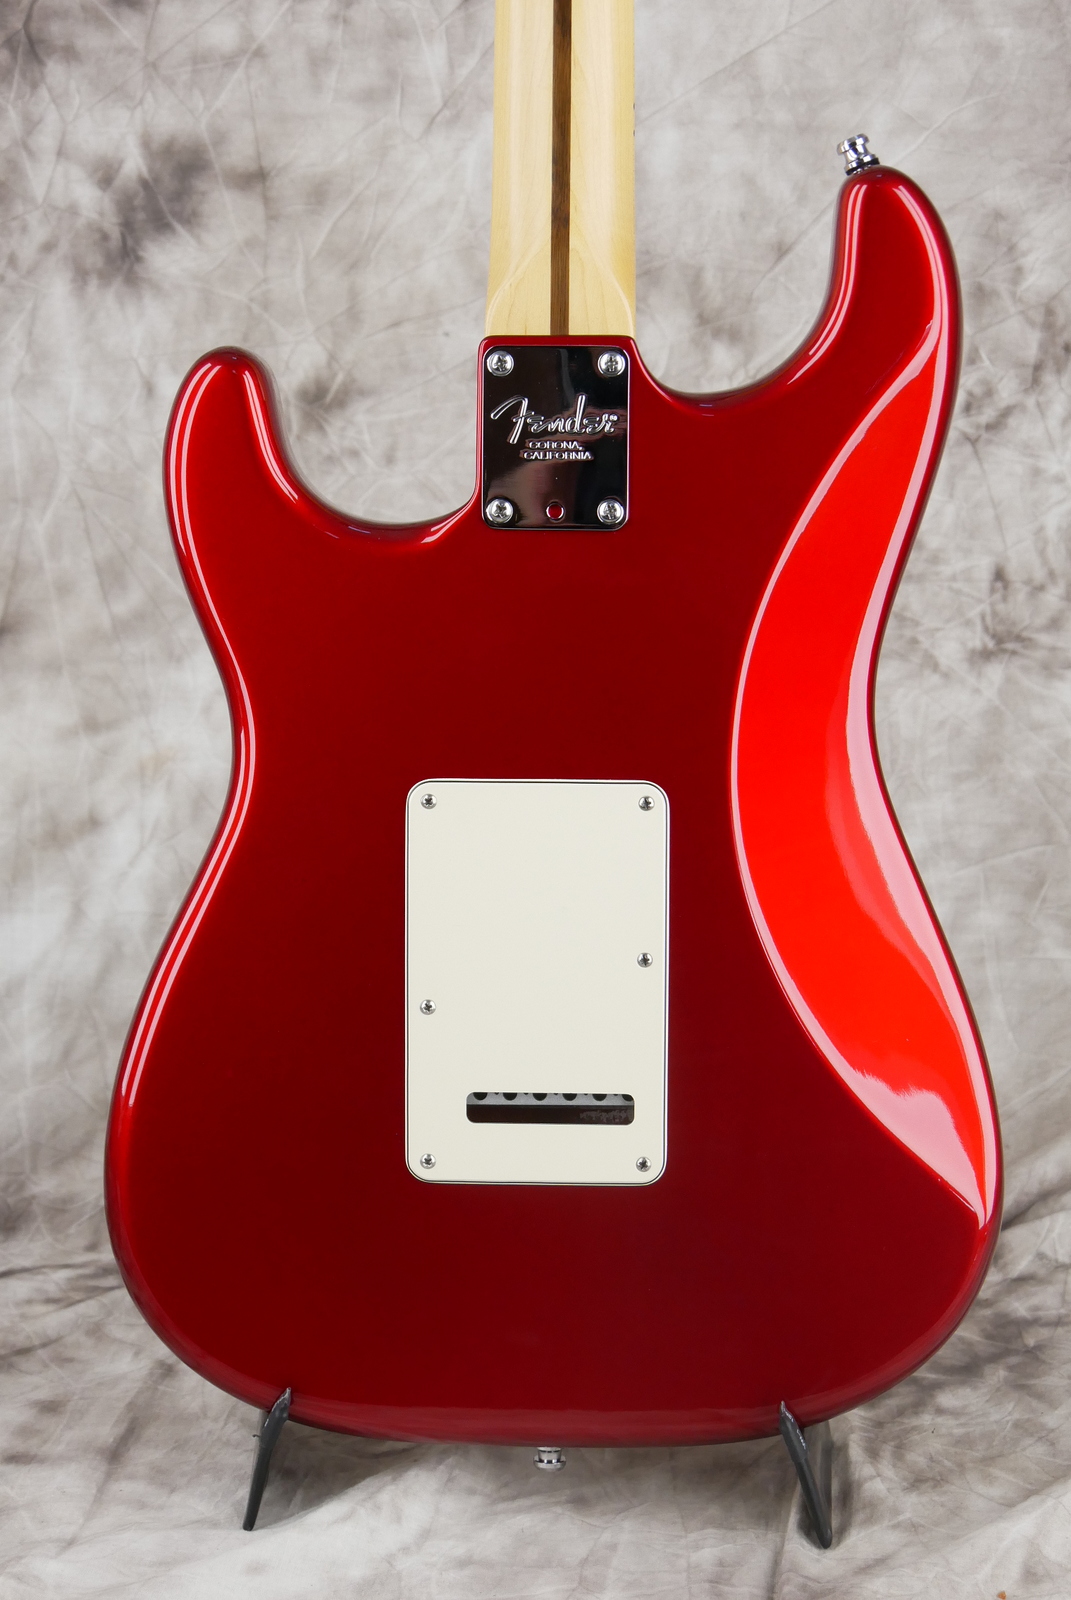 img/vintage/5279/Fender_Stratocaster_USA_built_from_parts_candy_apple_red_2015-004.JPG